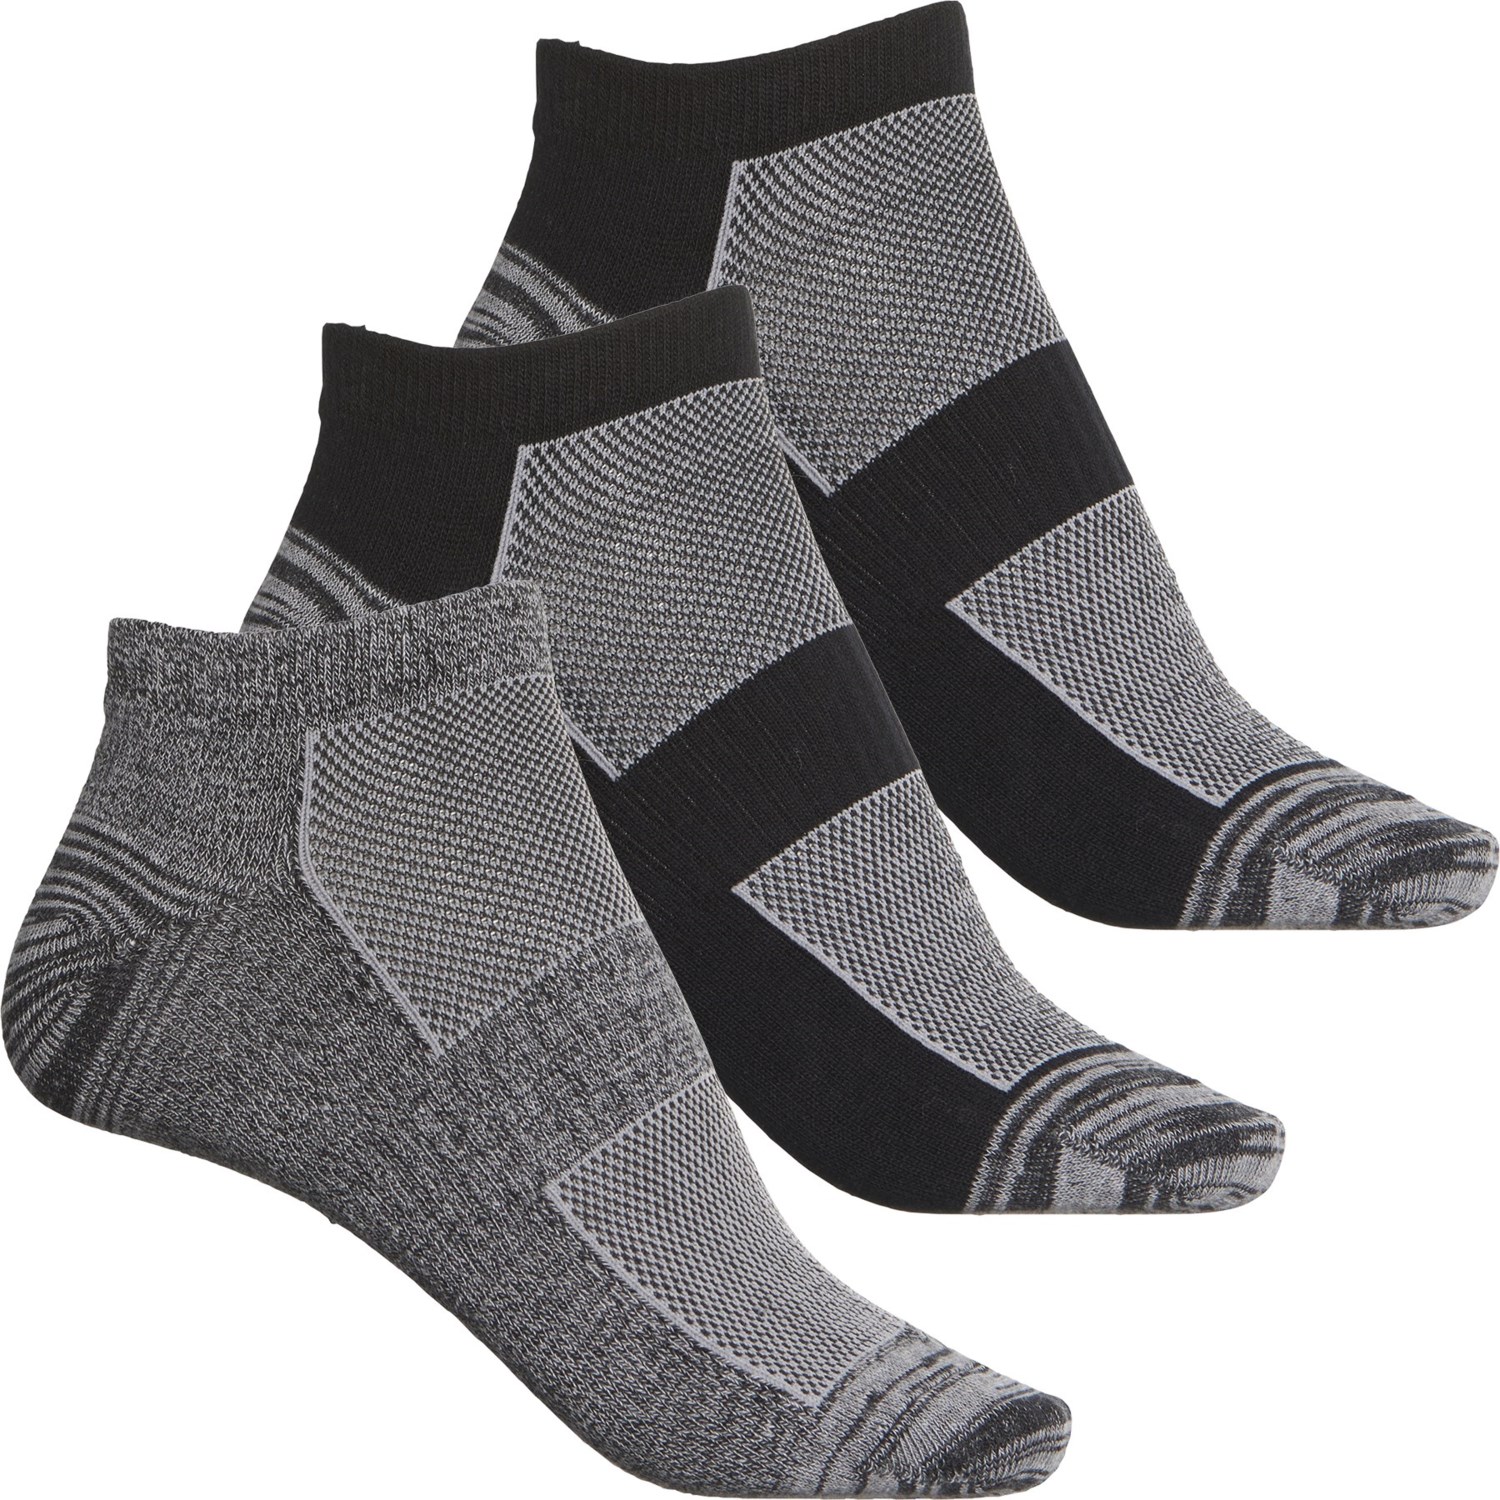 COLUMBIA No-Show Socks - 3-Pack, Below the Ankle (For Women)